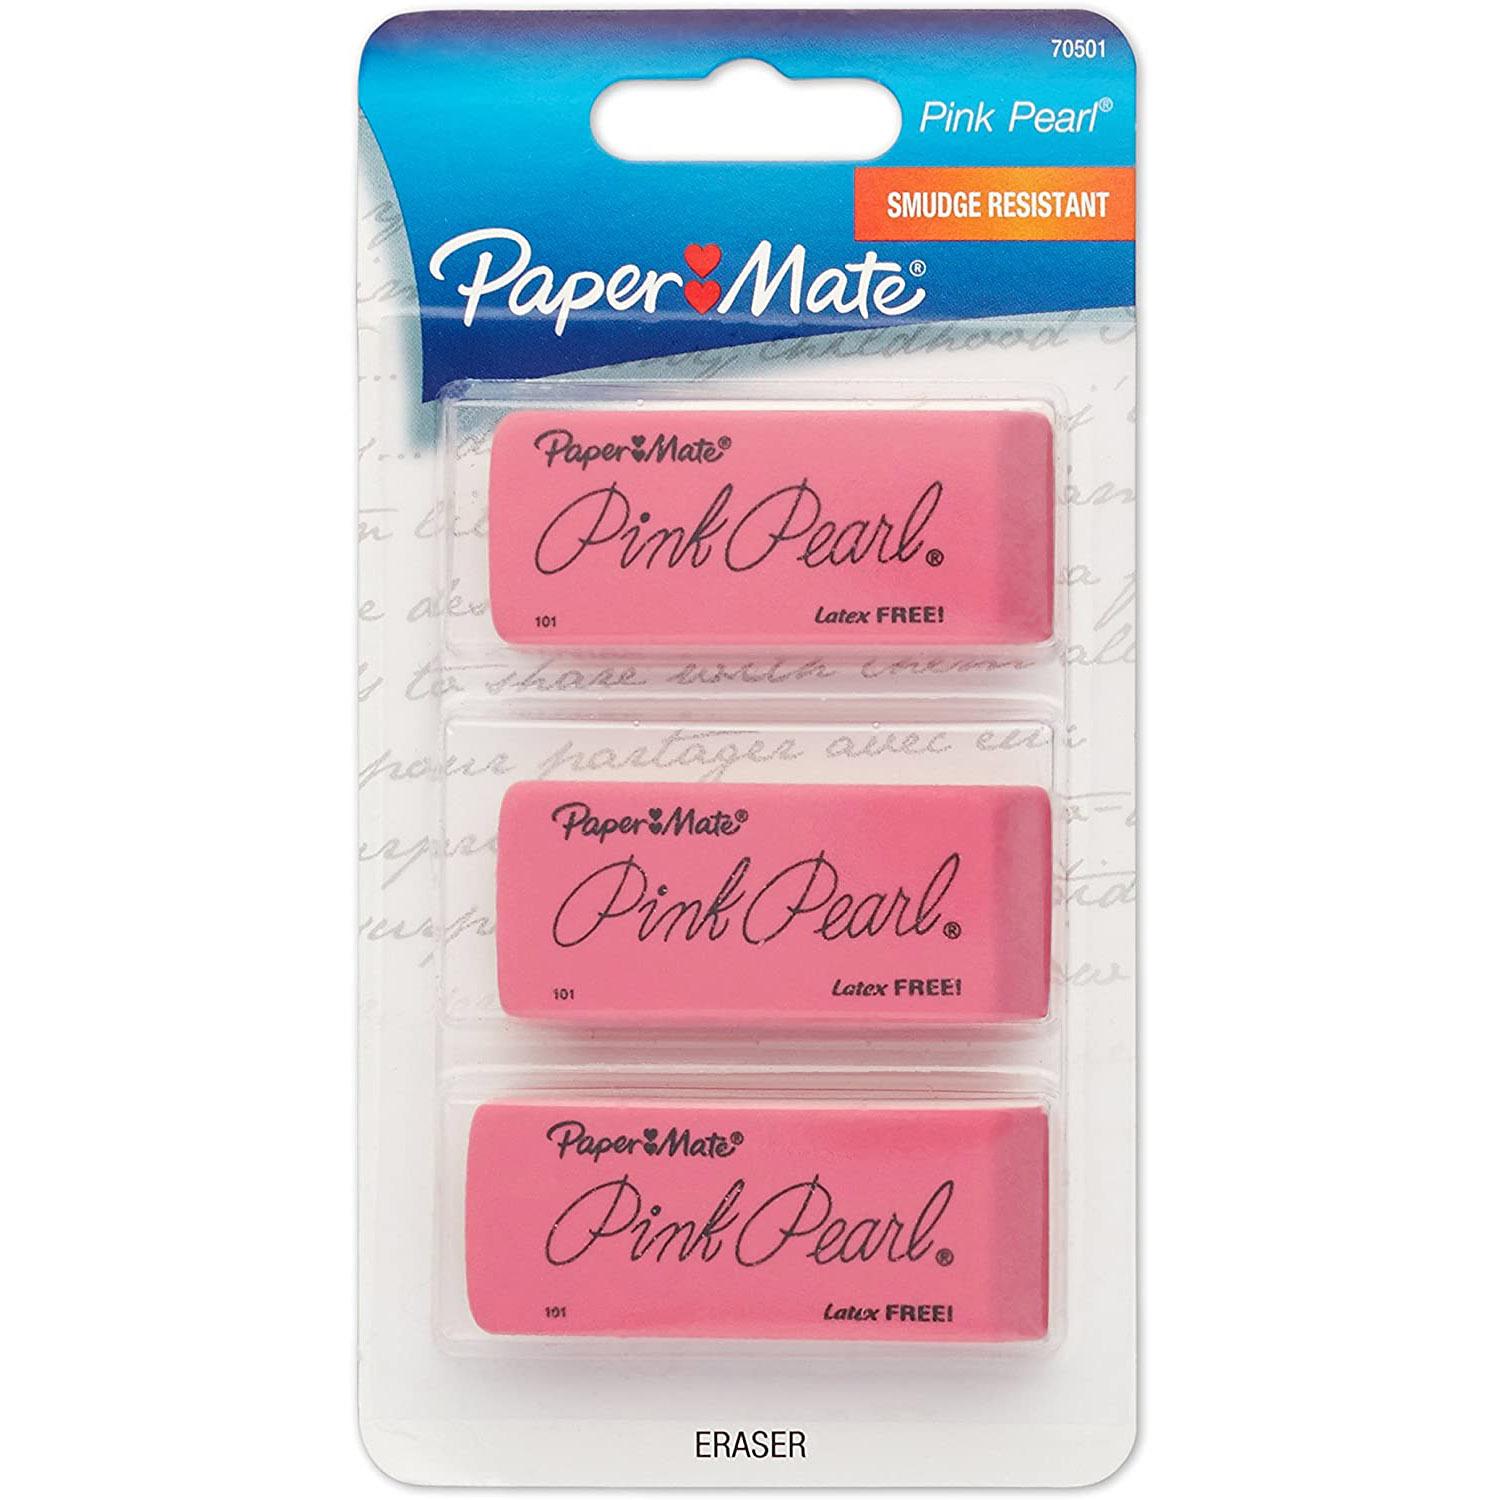 Paper Mate 3 Pink Pearl Erasers for $1.44